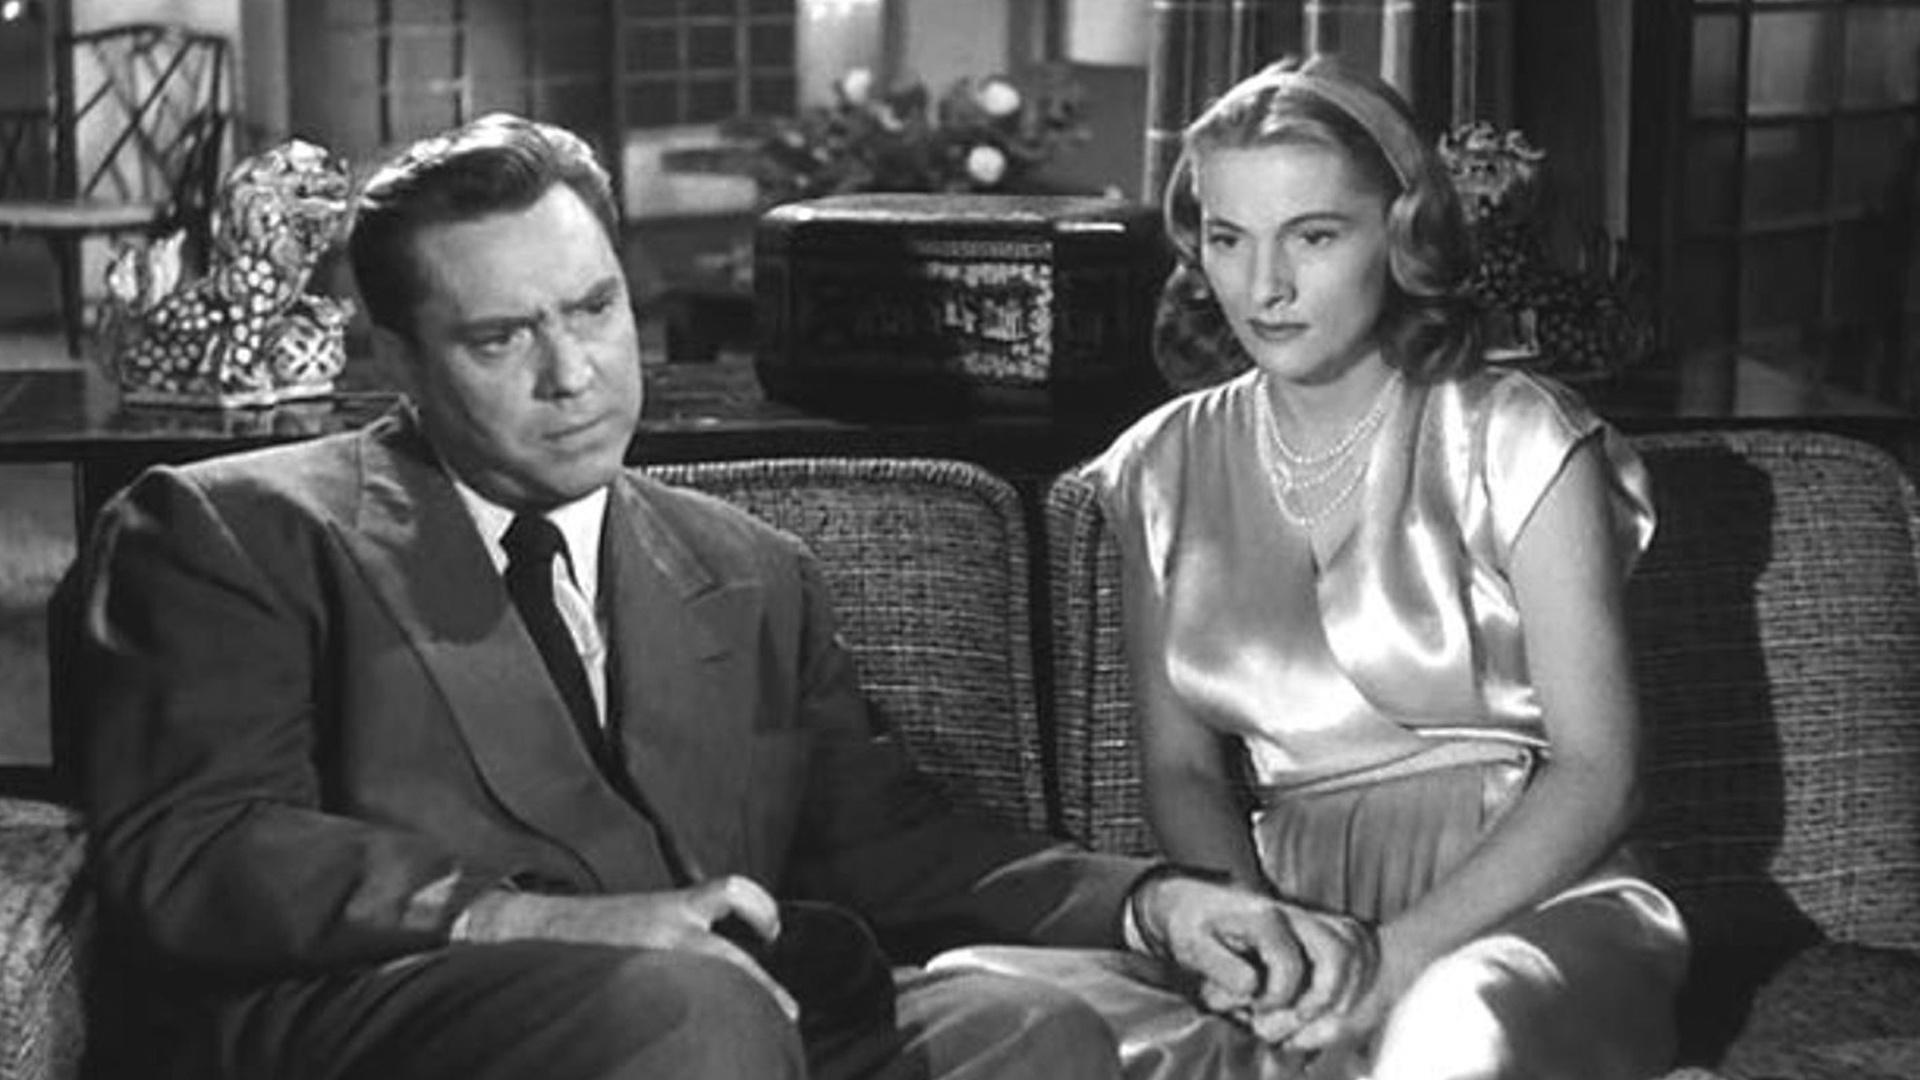 Still from the 1953 Ida Lupino film "The Bigamist" starring the director, Edmond O'Brien, and Joan Fontaine